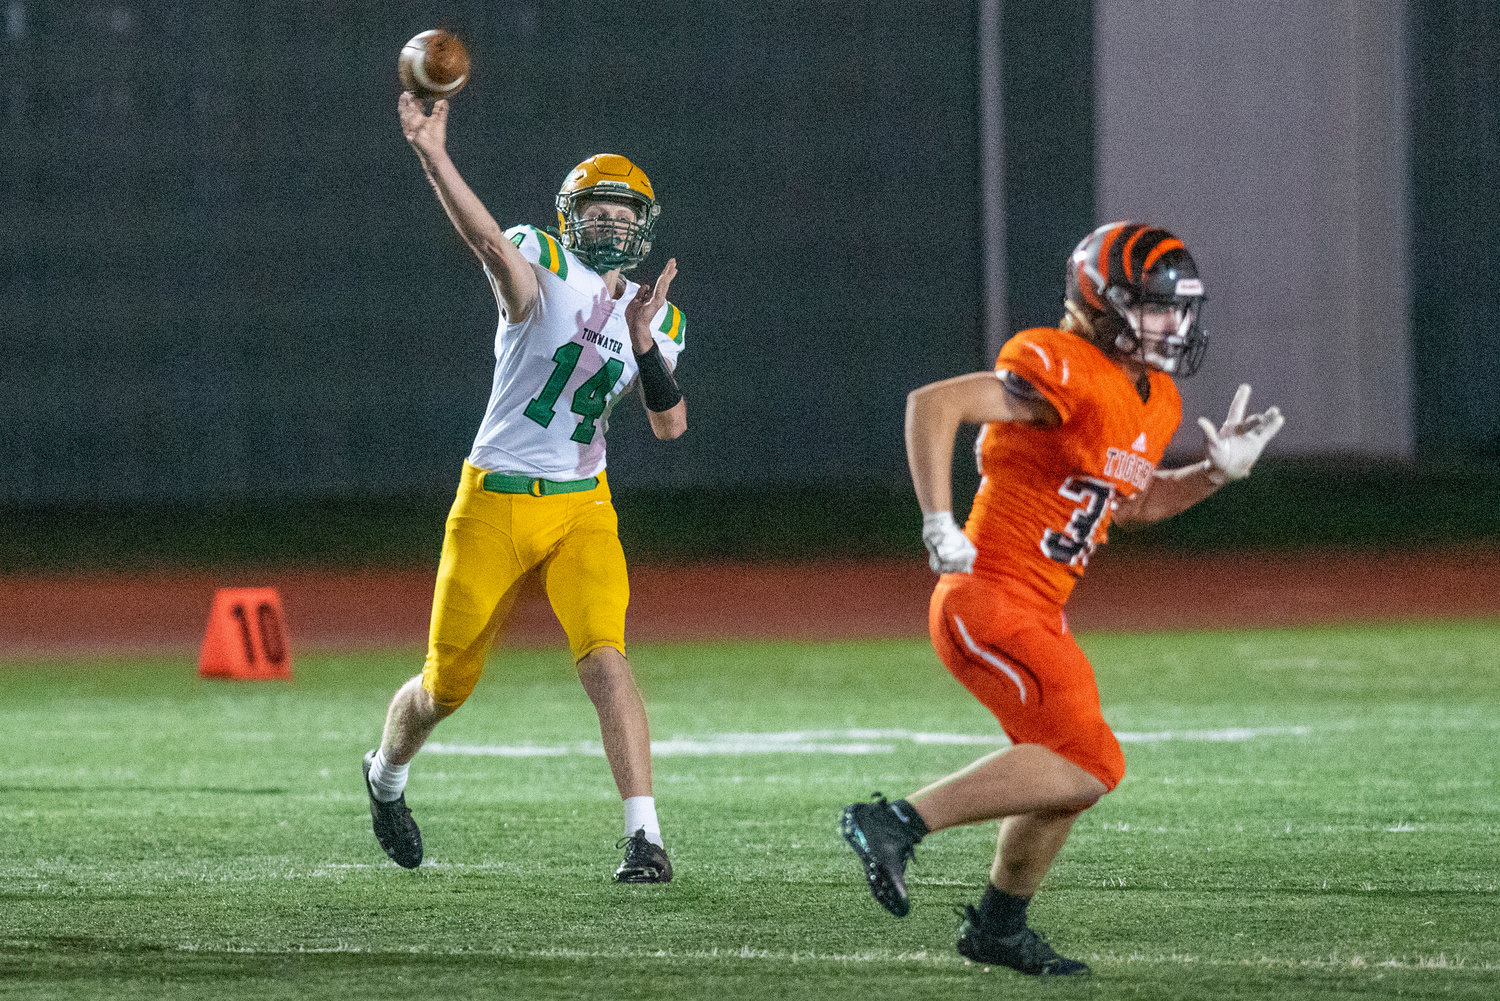 Tumwater quarterback Alex Overbay (14) fires a pass against Centralia at Tiger Stadium Oct. 29.